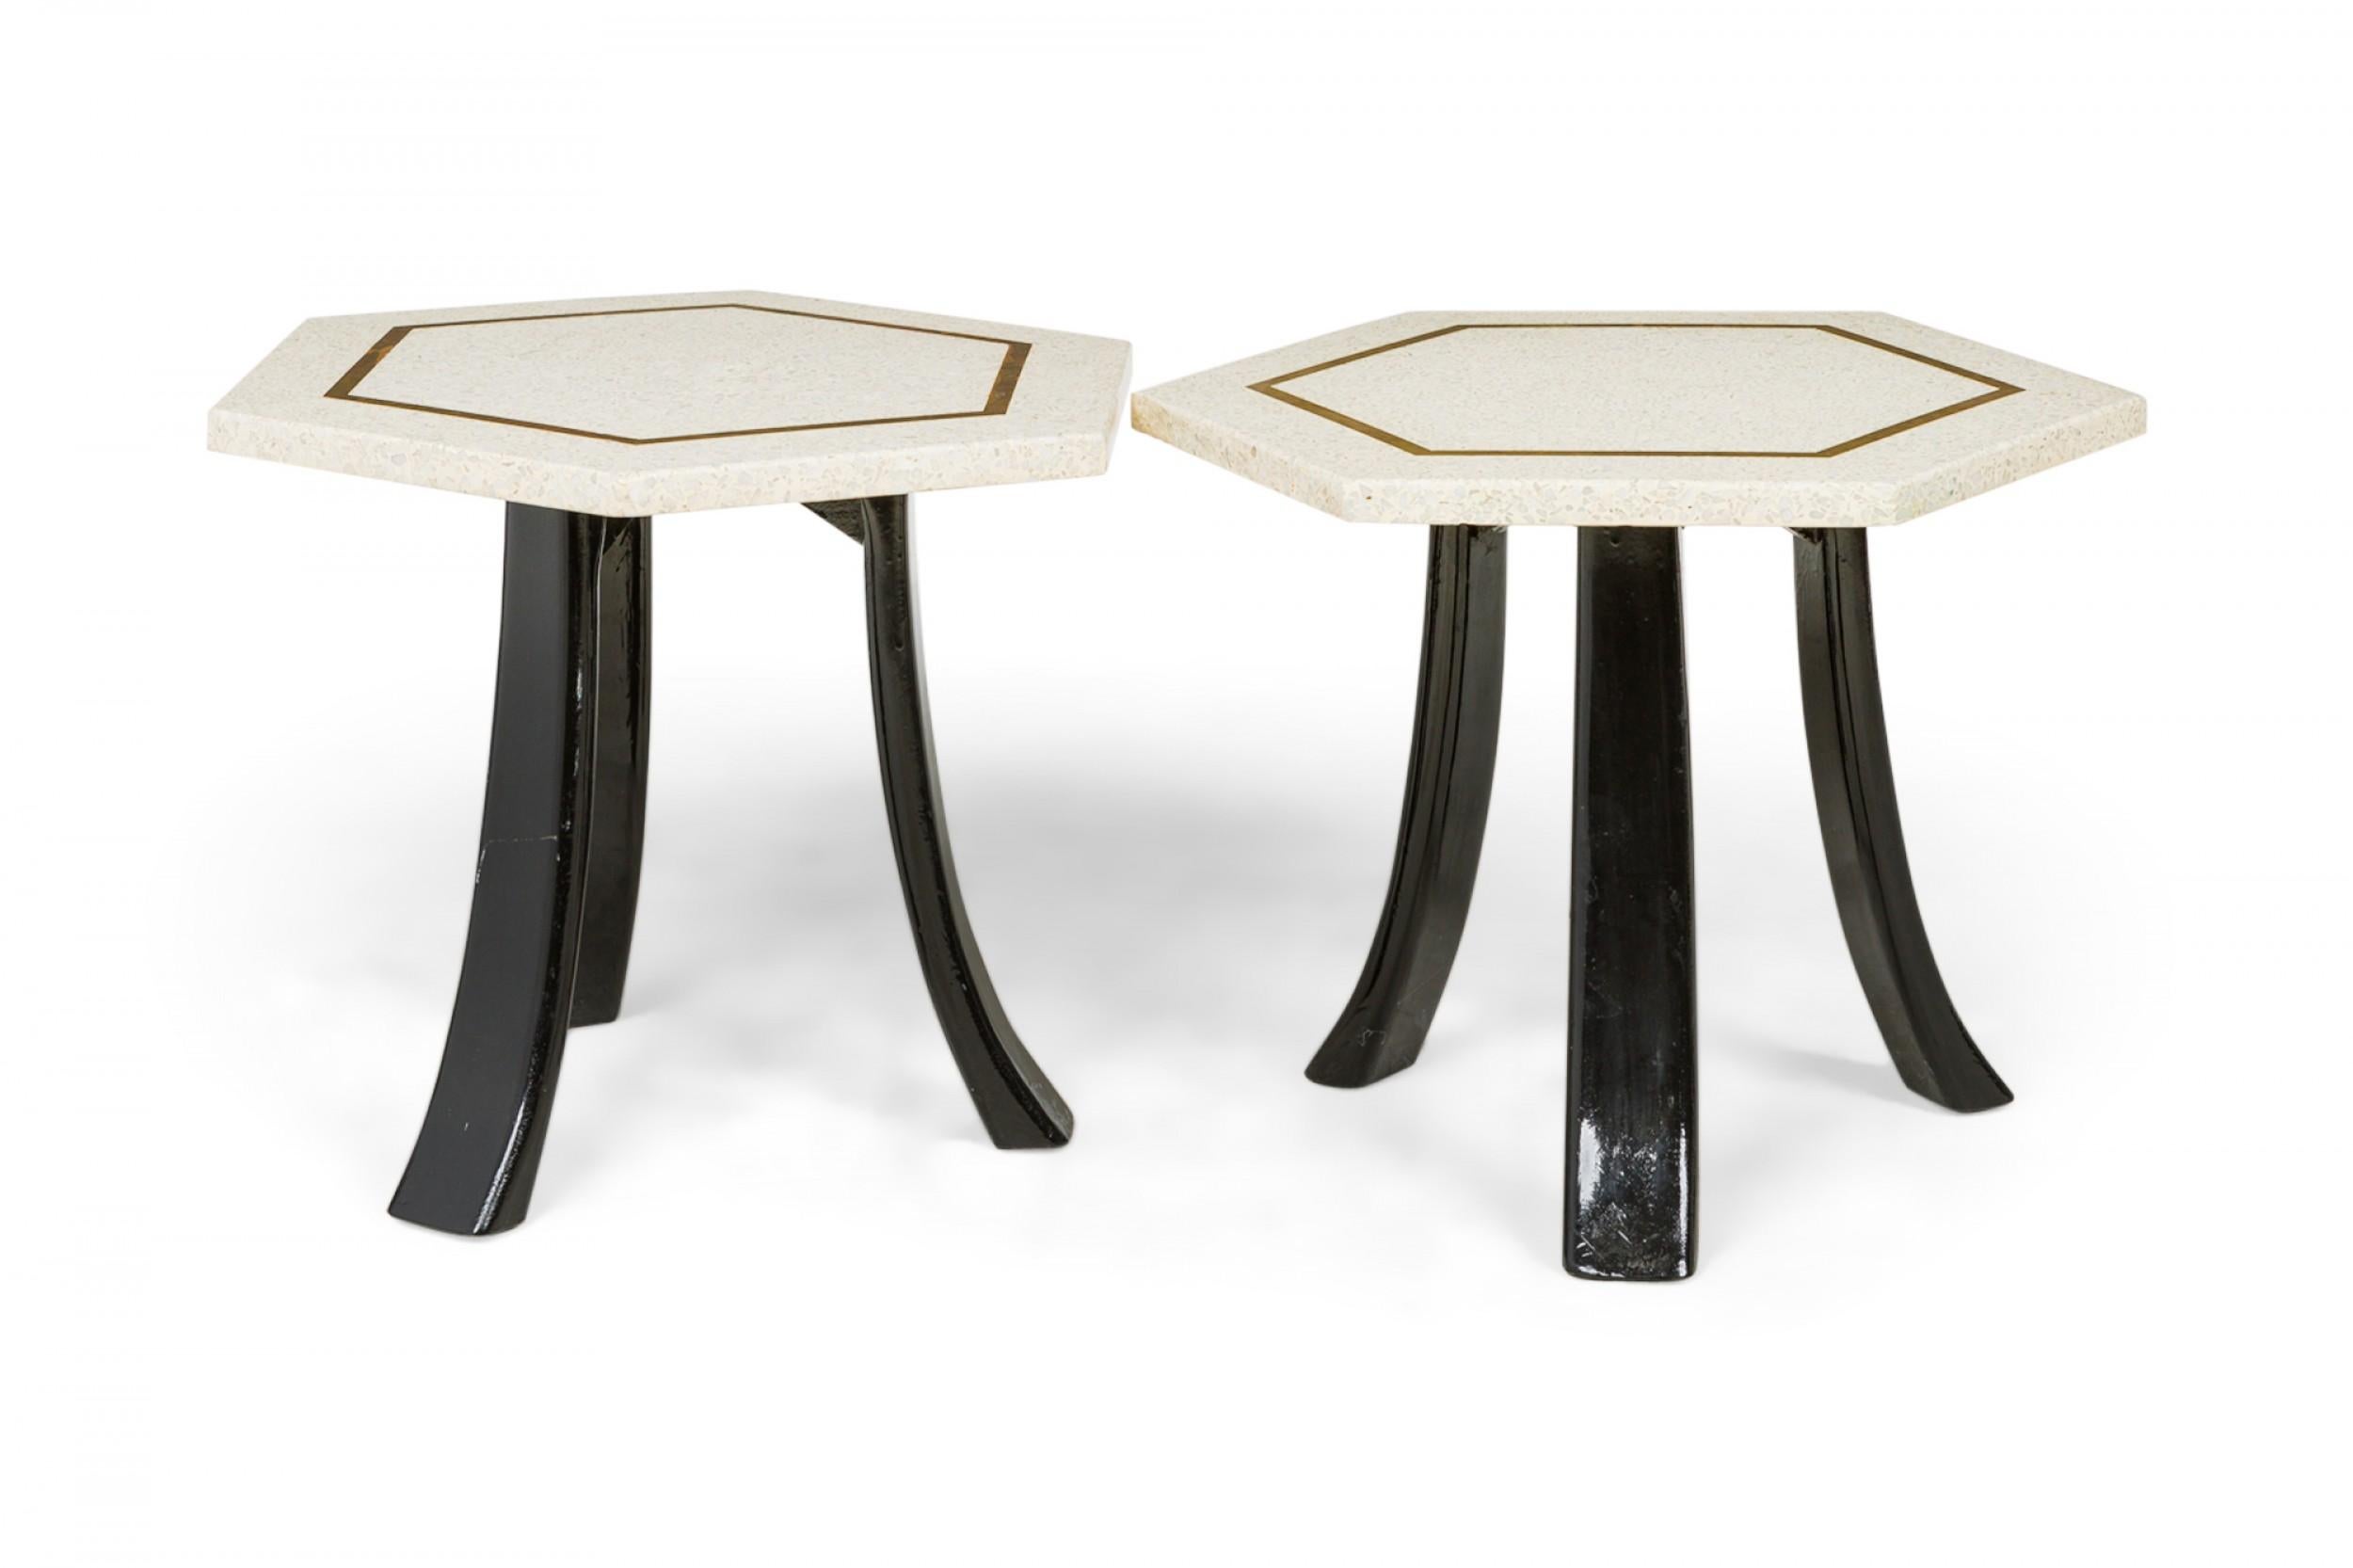 2 American mid-century end / side tables with hexagonal white terrazzo tops with a bronze inlaid hexagonal design supported on three curved black lacquered wooden legs. (Harvey Probber)(Priced Each).
   